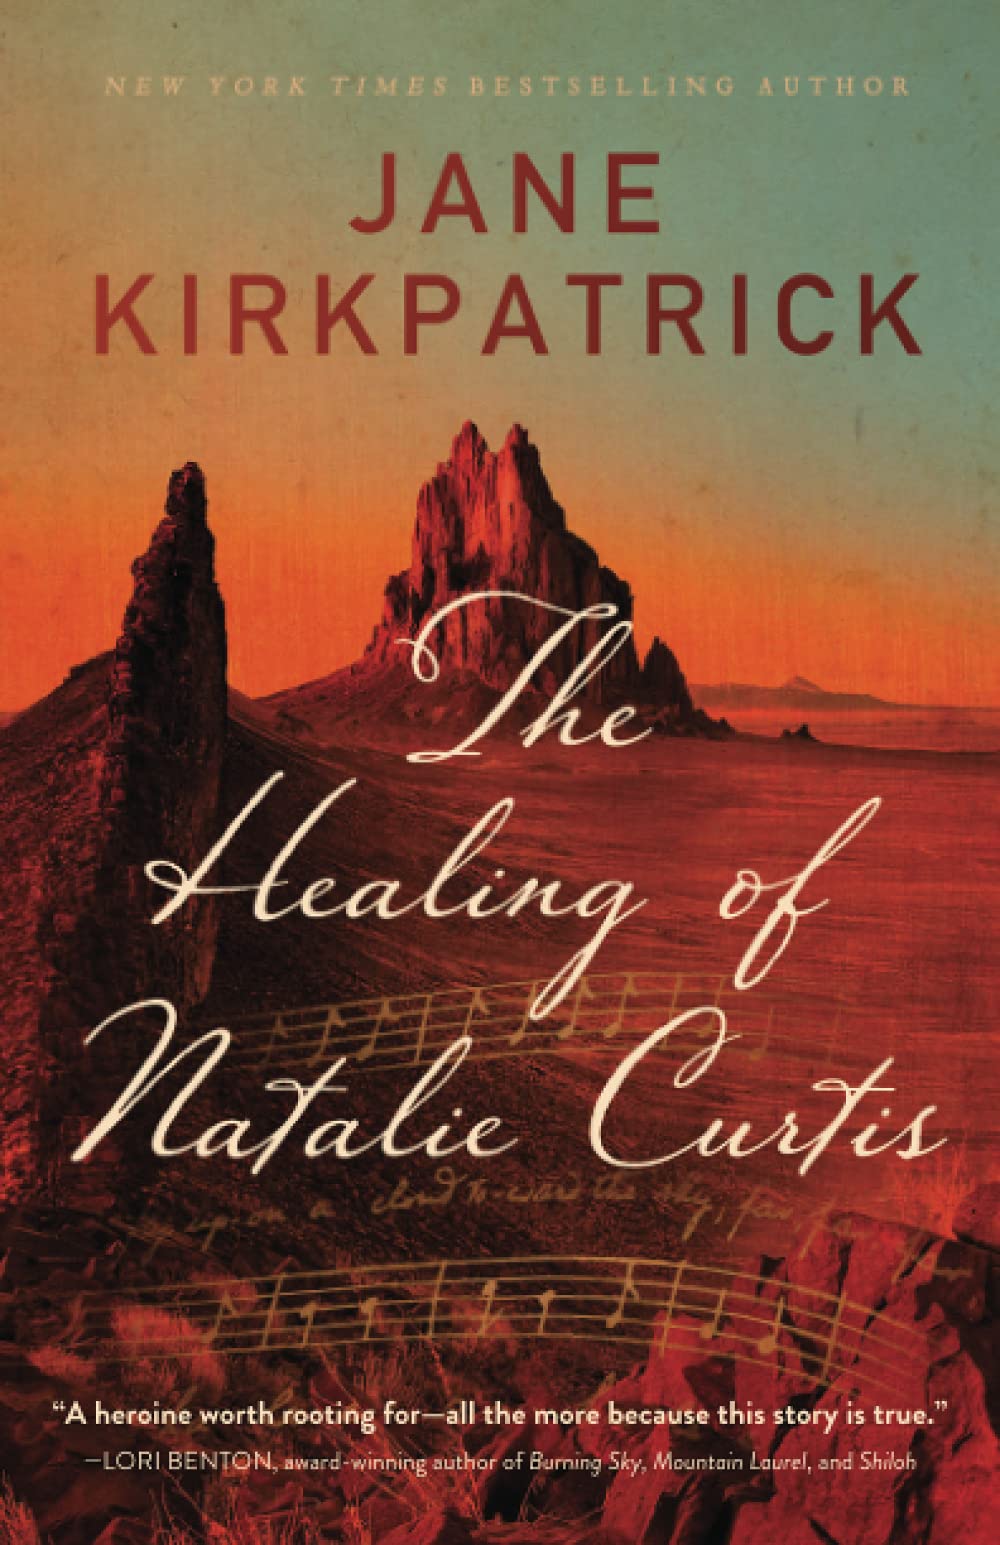 Image for "The Healing of Natalie Curtis"